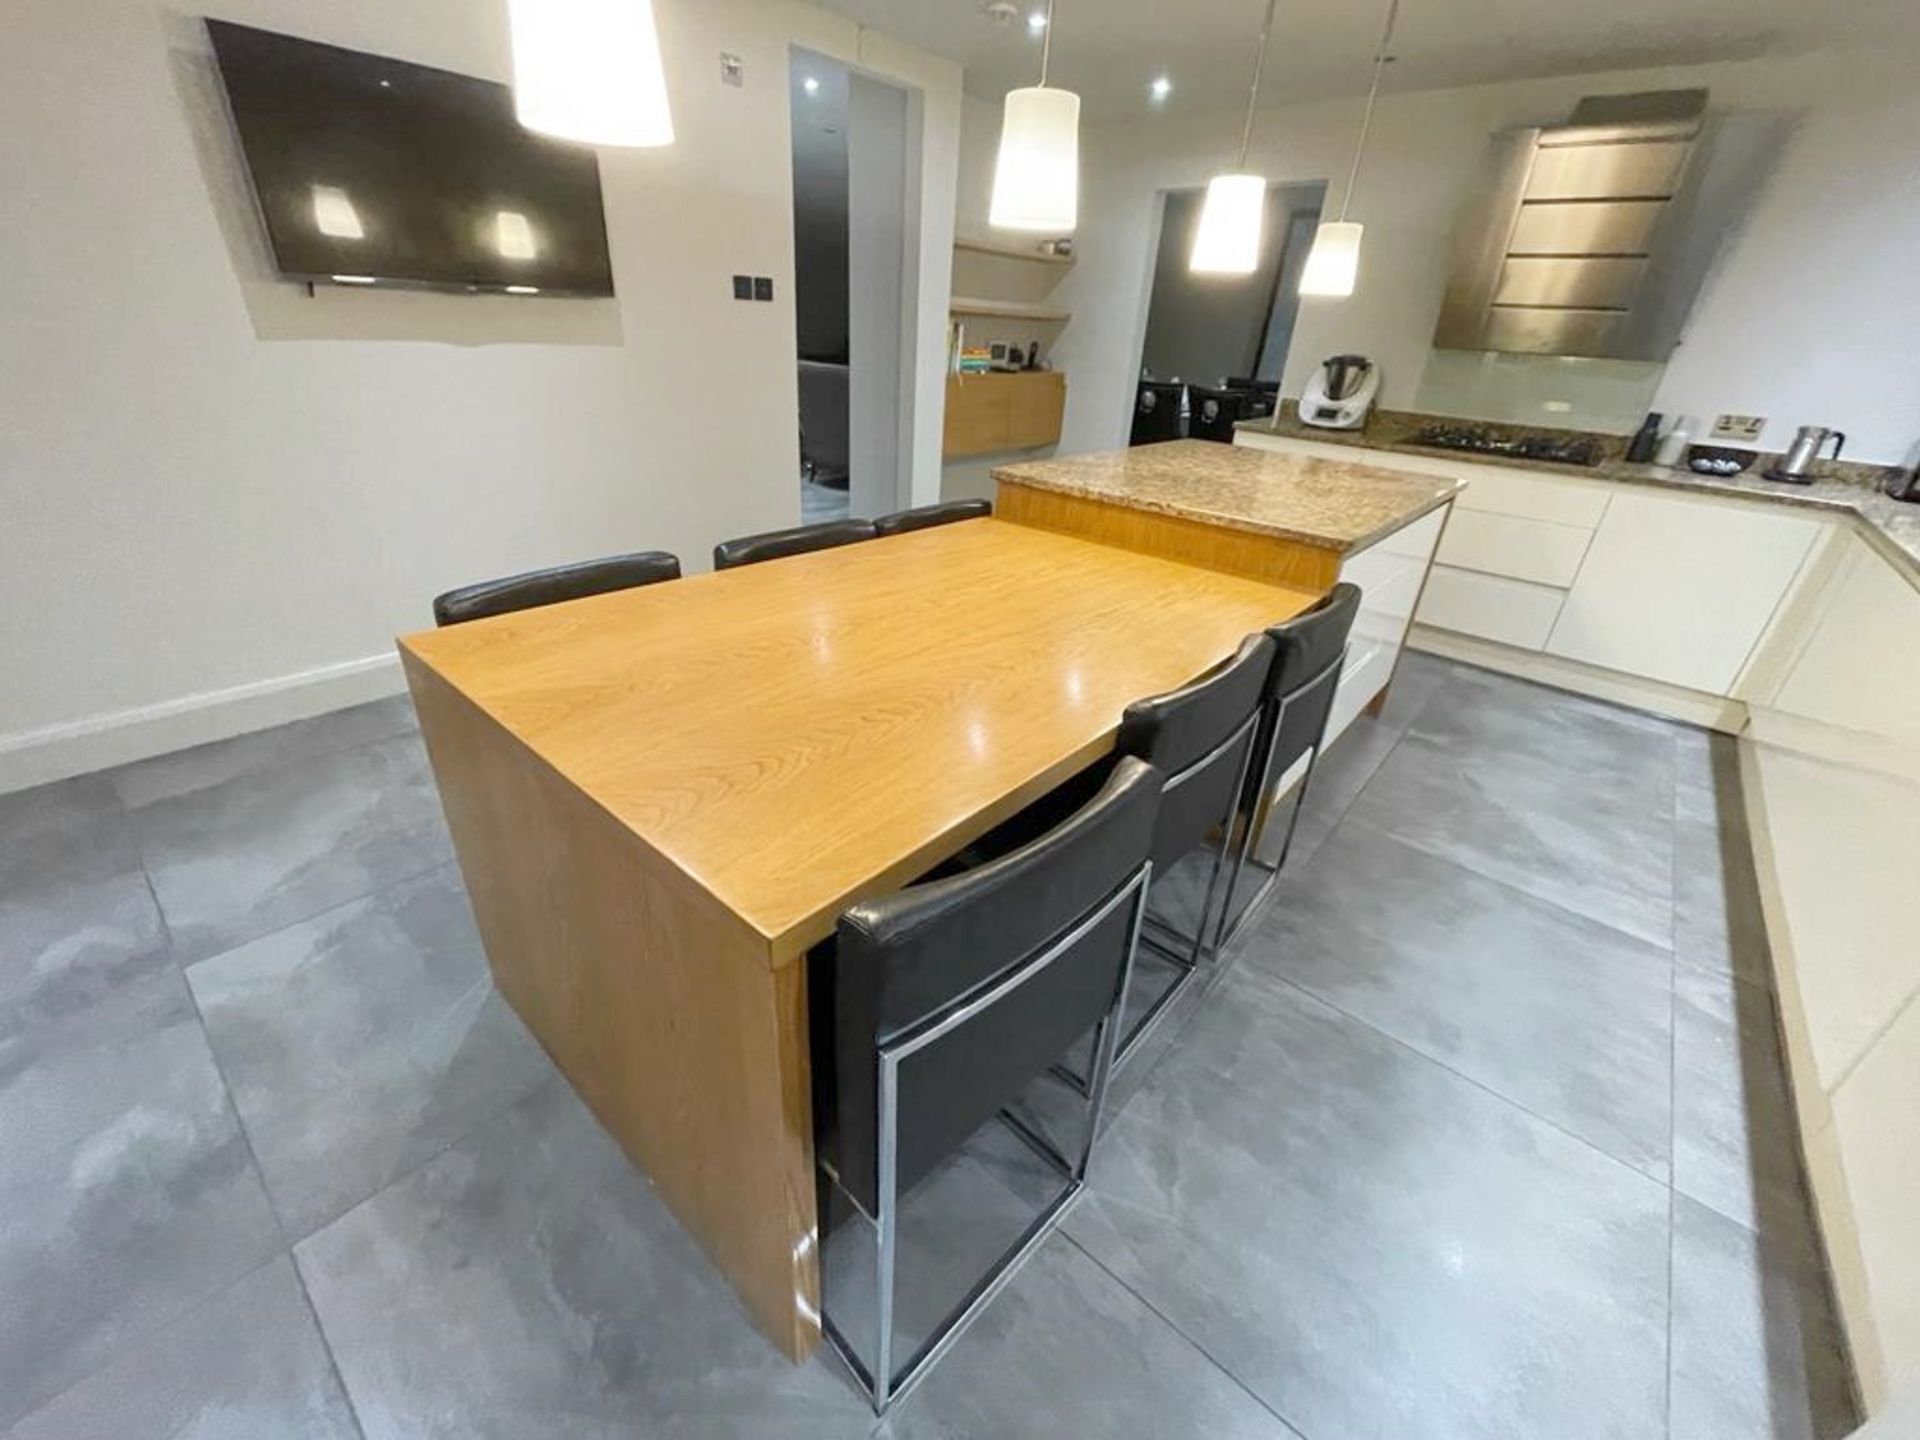 1 x Stunning PARAPAN Handleless Fitted Kitchen with Neff Appliances, Granite Worktops & Island - Image 15 of 126